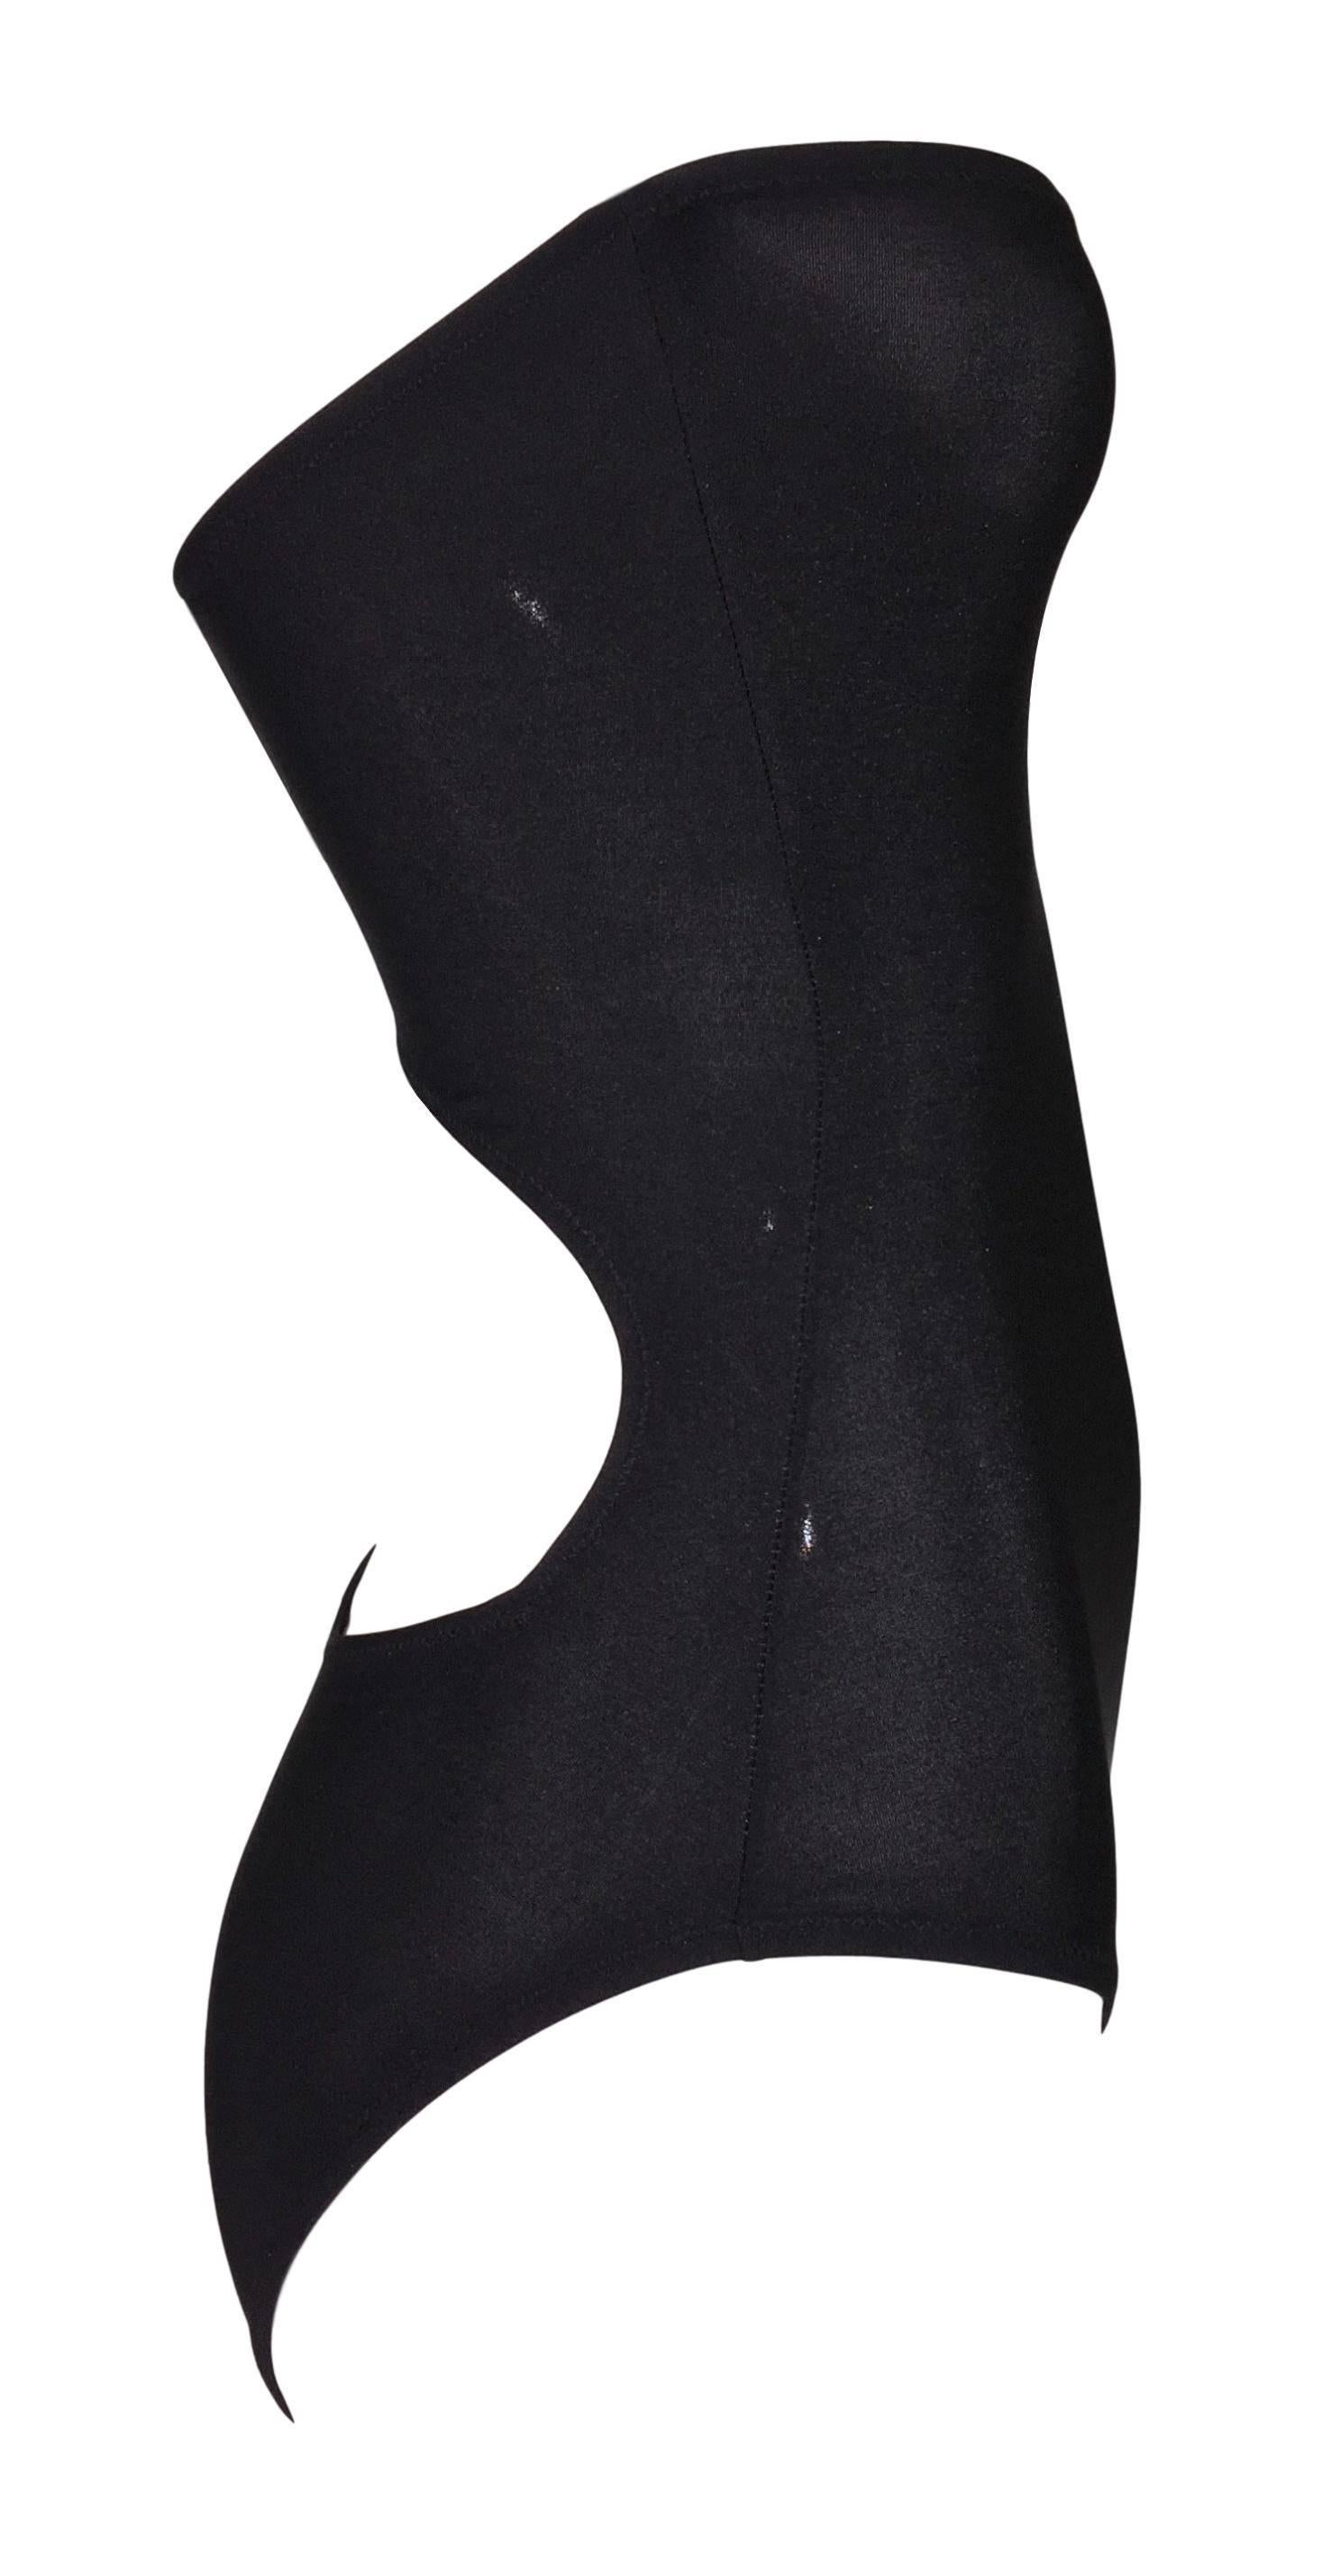 S/S 2001 Gianni Versace Sheer Black Strapless Cut-Out Bodysuit Swimsuit In New Condition In Yukon, OK